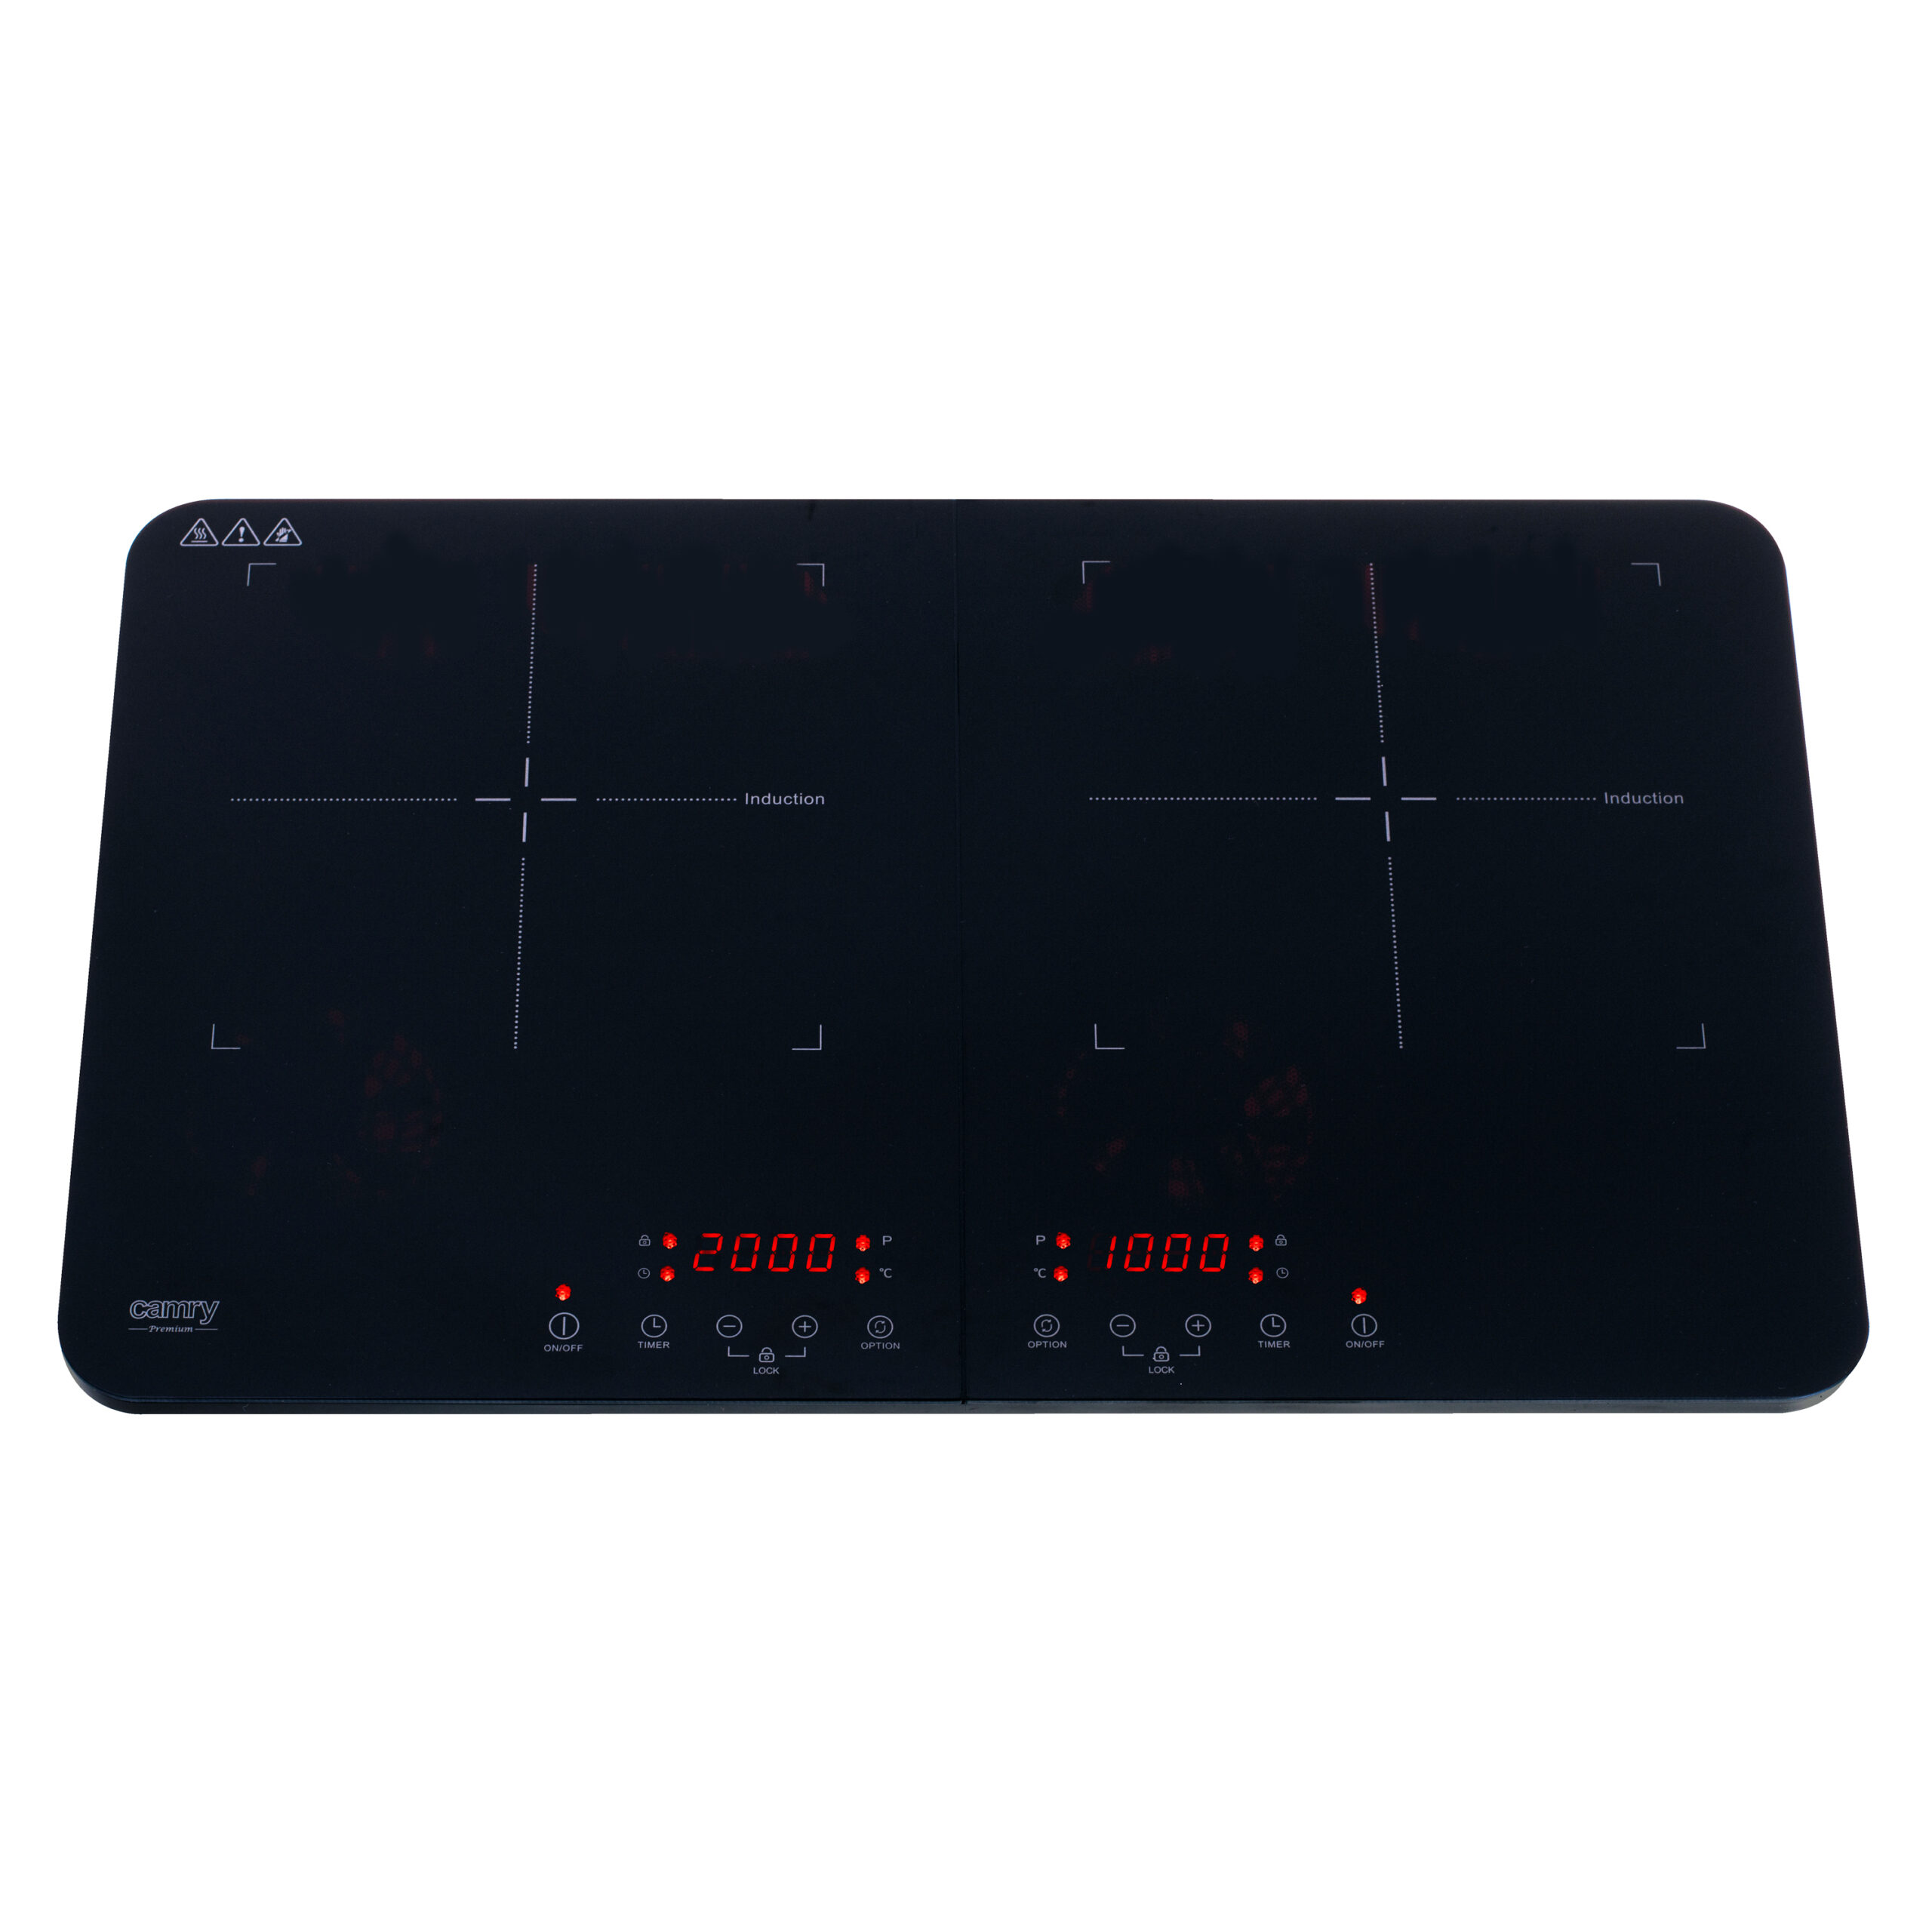 Camry CR 6514 Cooker induction two-burner